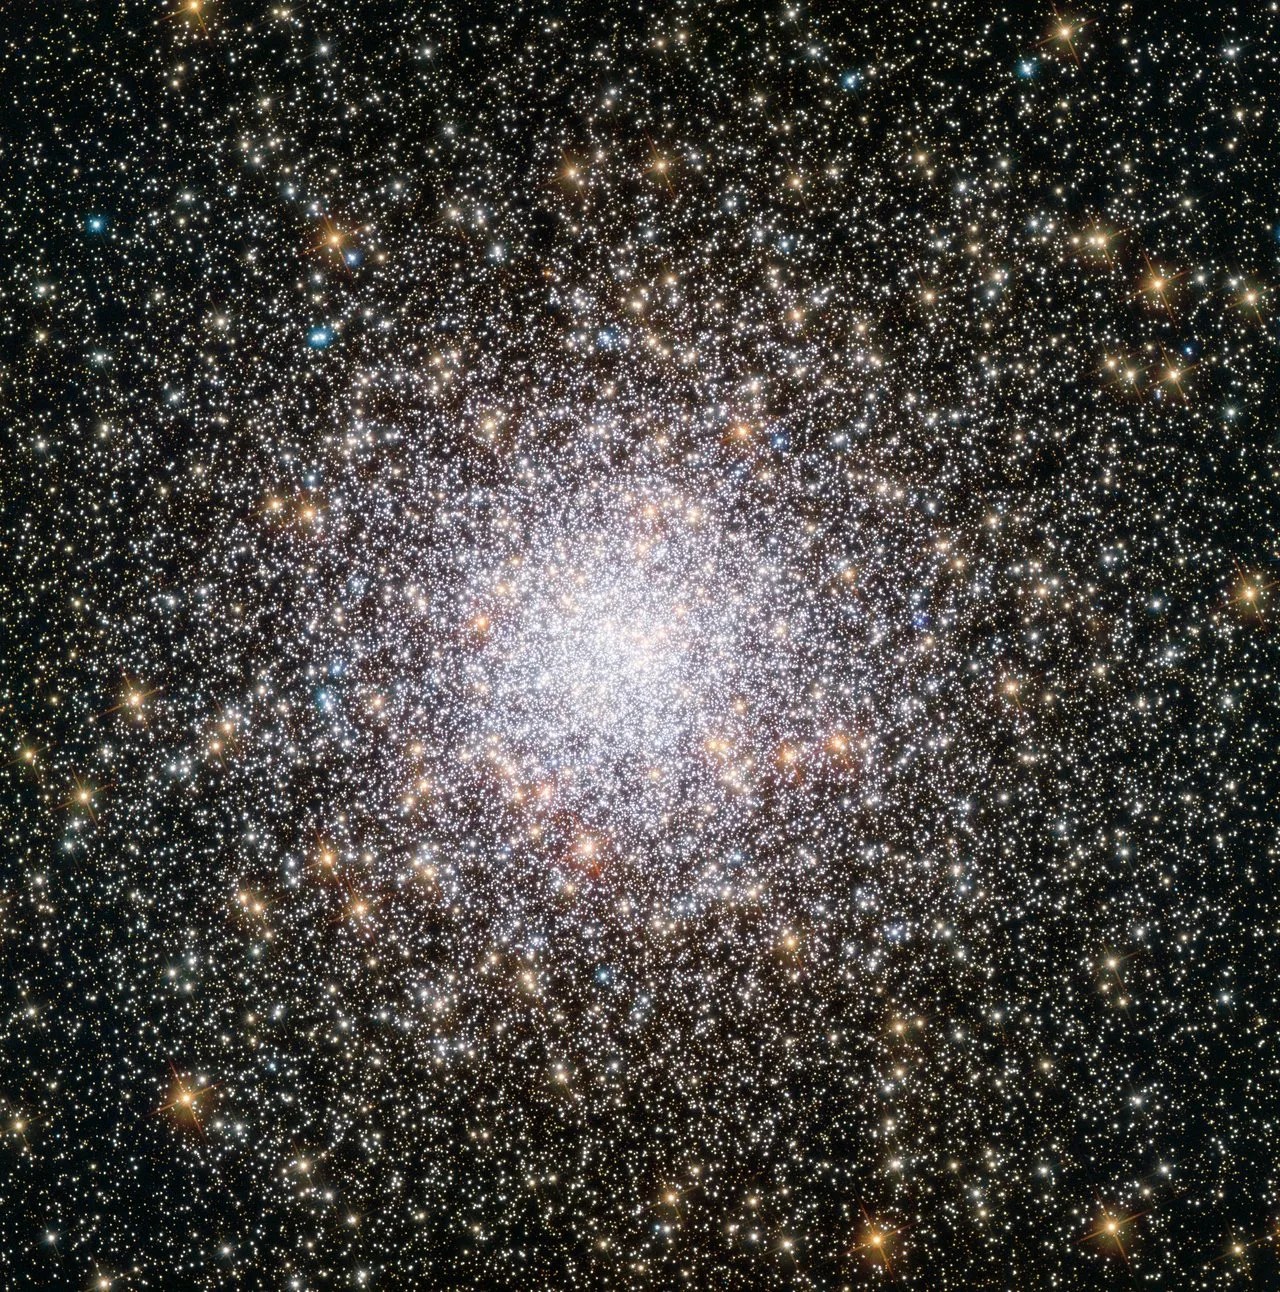 Dense ball of stars thinning to the edges